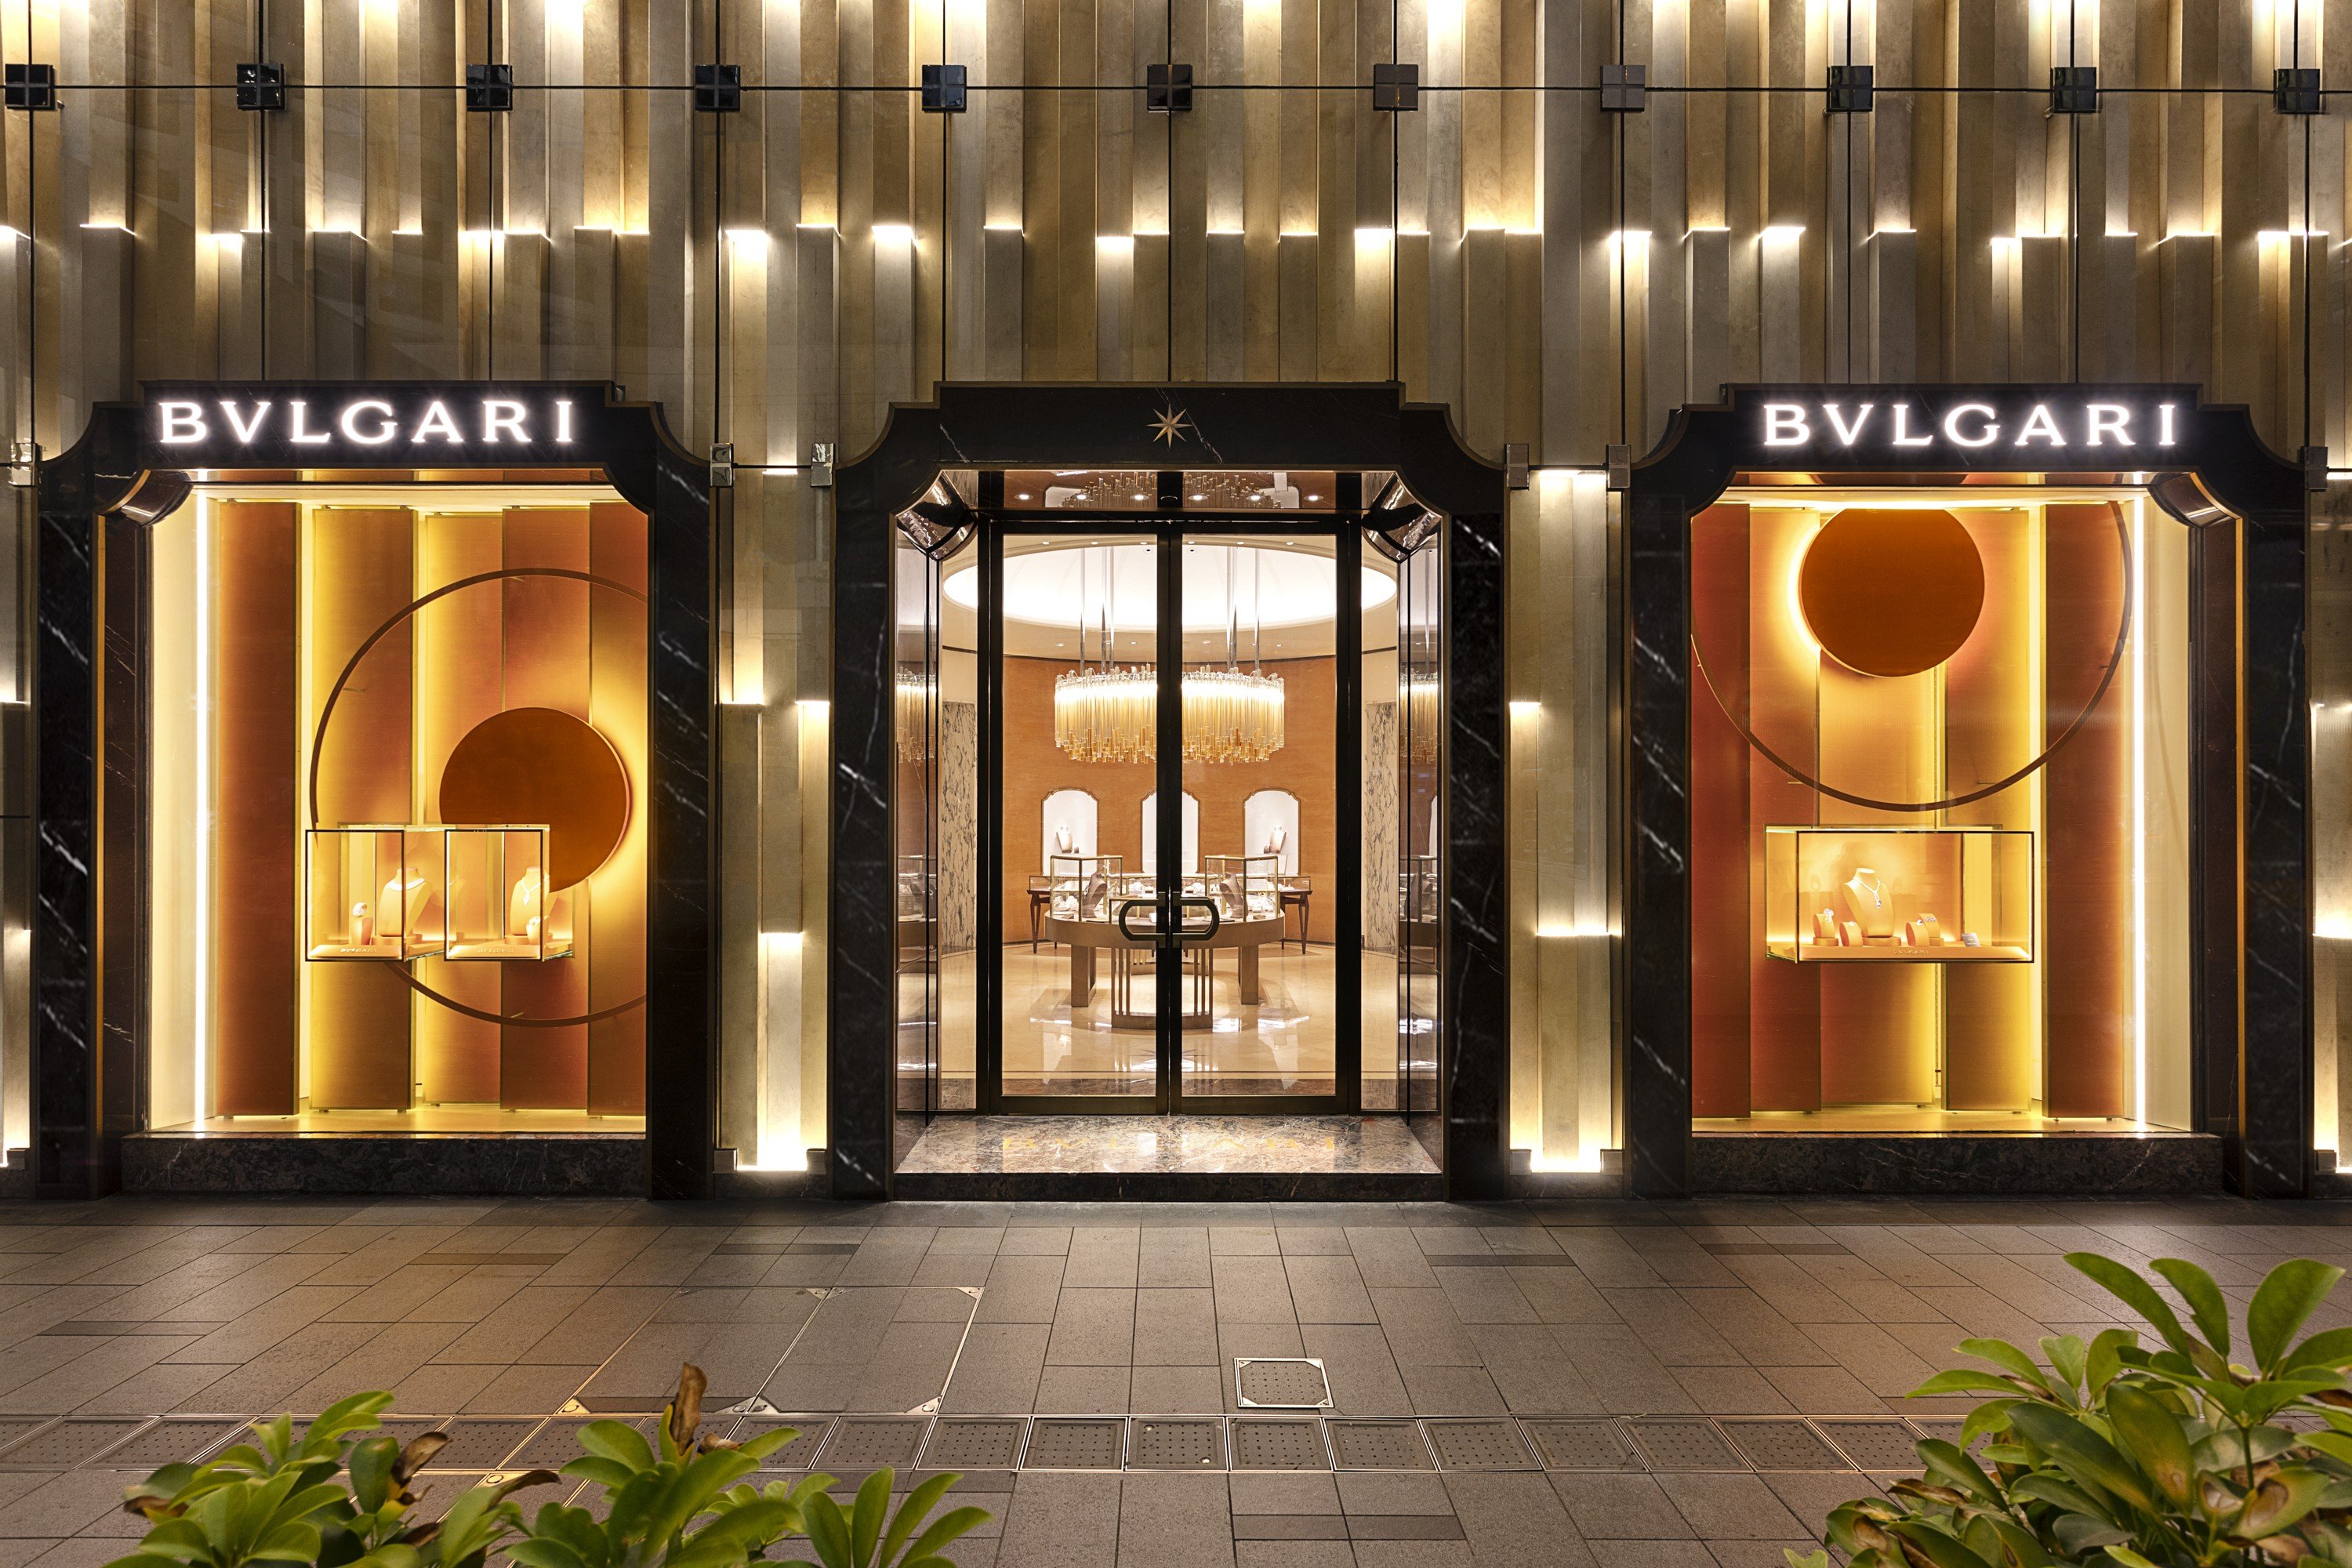 Bulgari brings the glamorous essence of Rome to Hong Kong with its renovated 3,000-square-foot flagship store.